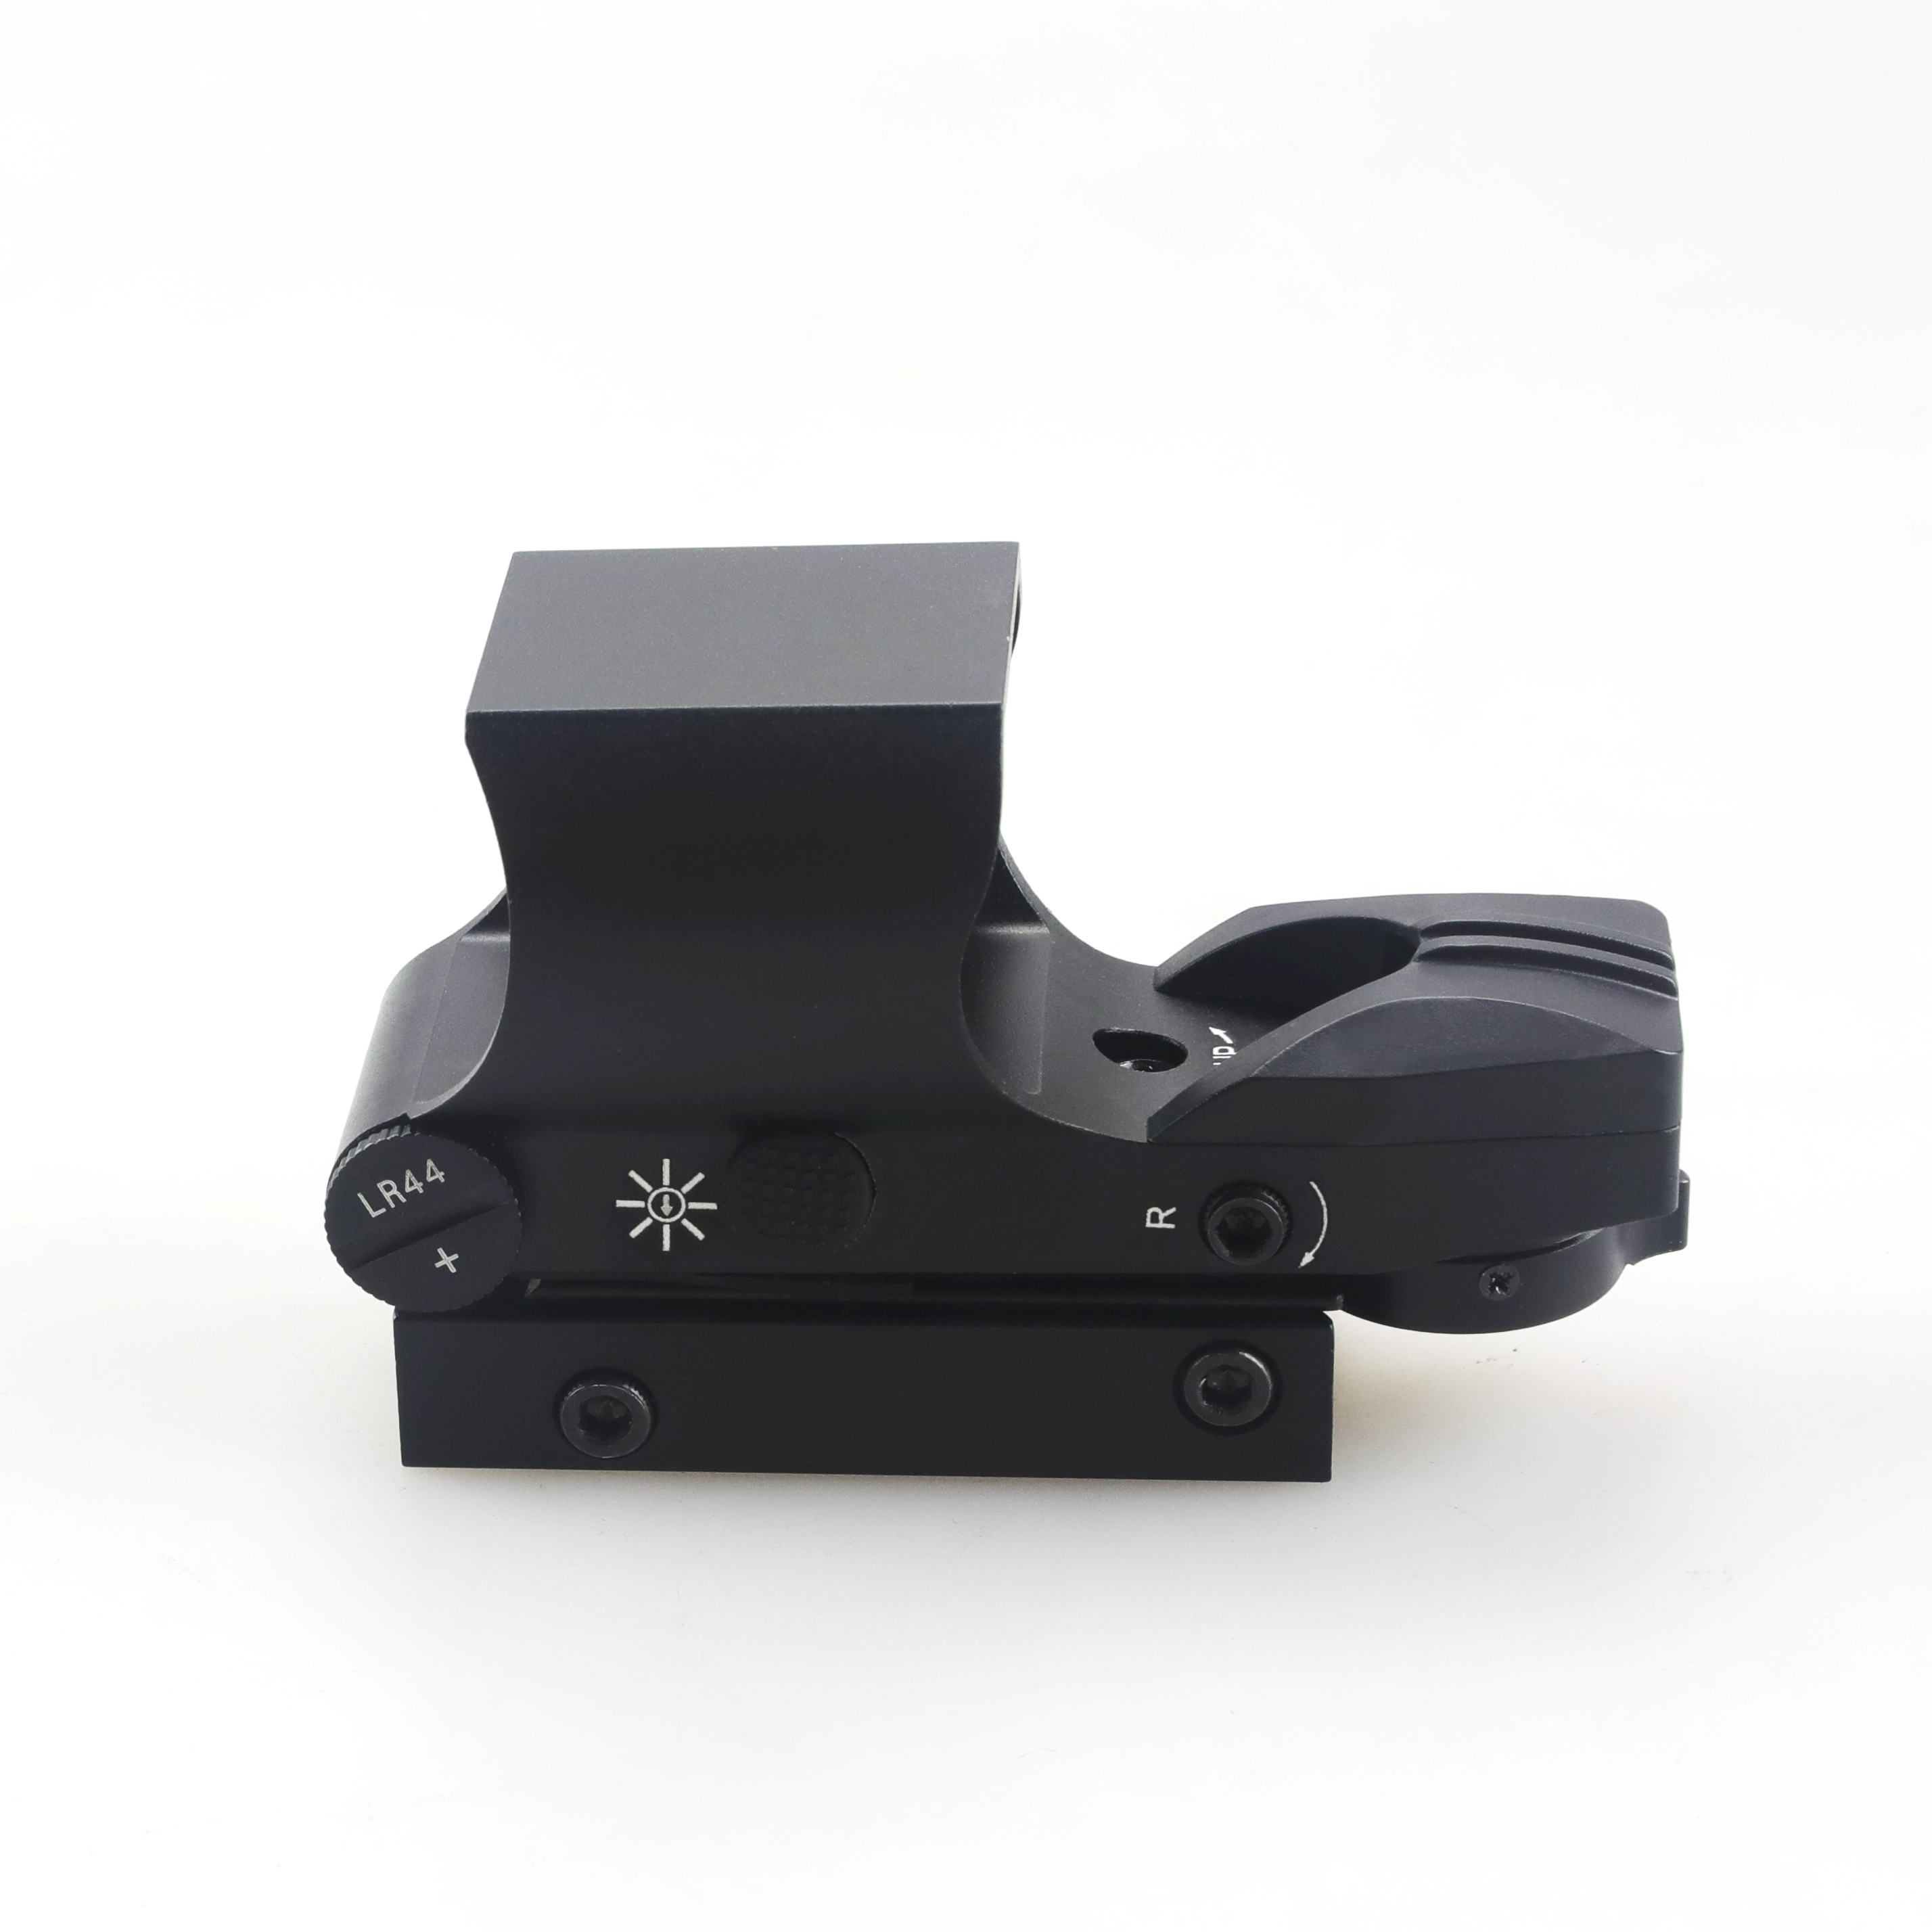 Reflex Sight, Multiple Reticle System Red Dot Sight with Picatinny Rail Mount